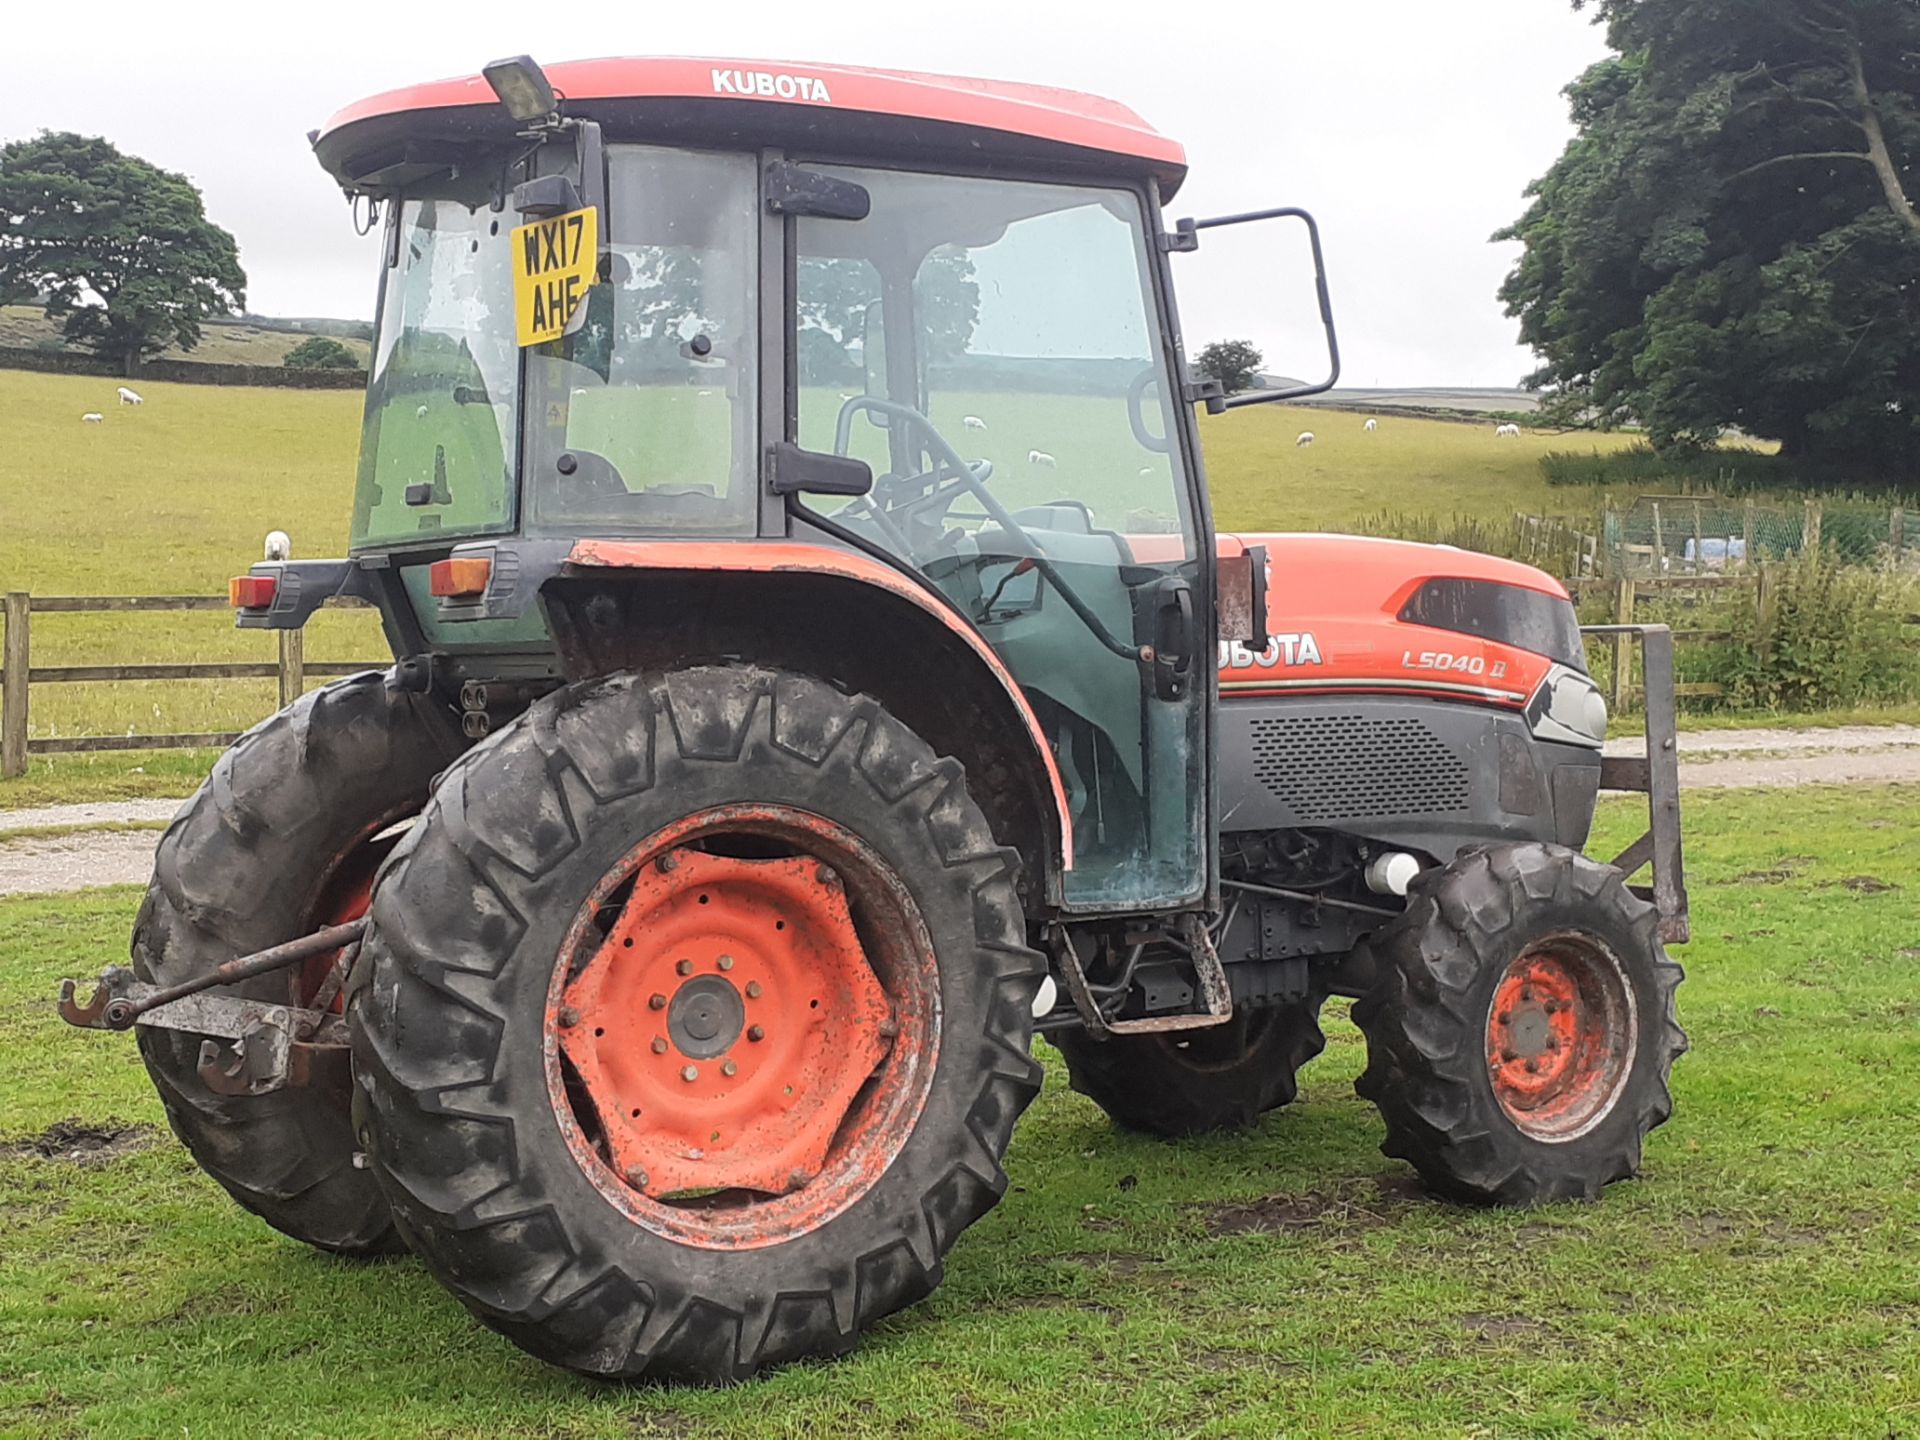 2017 KUBOTA L5040 SERIEE II COMPACT TRACTOR, ROAD REGISTERED, A LOW 3490 HOURS *PLUS VAT* - Image 3 of 4